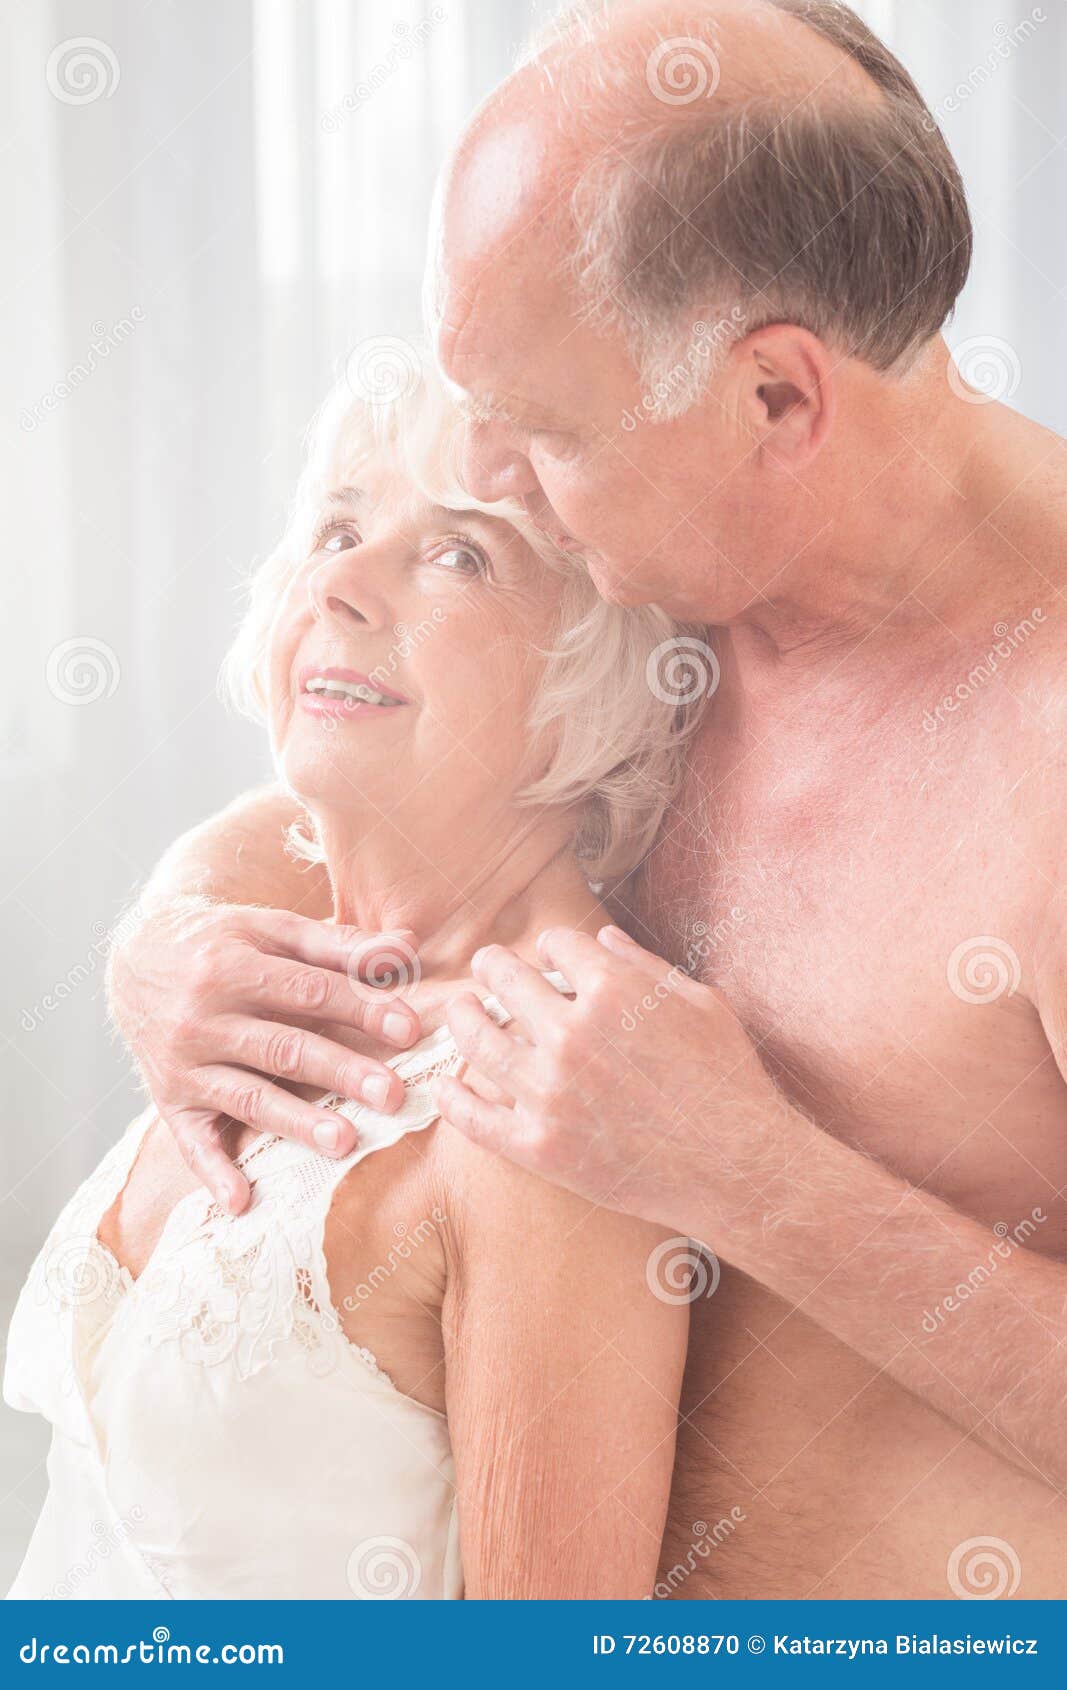 We re not too old for sex stock photo photo